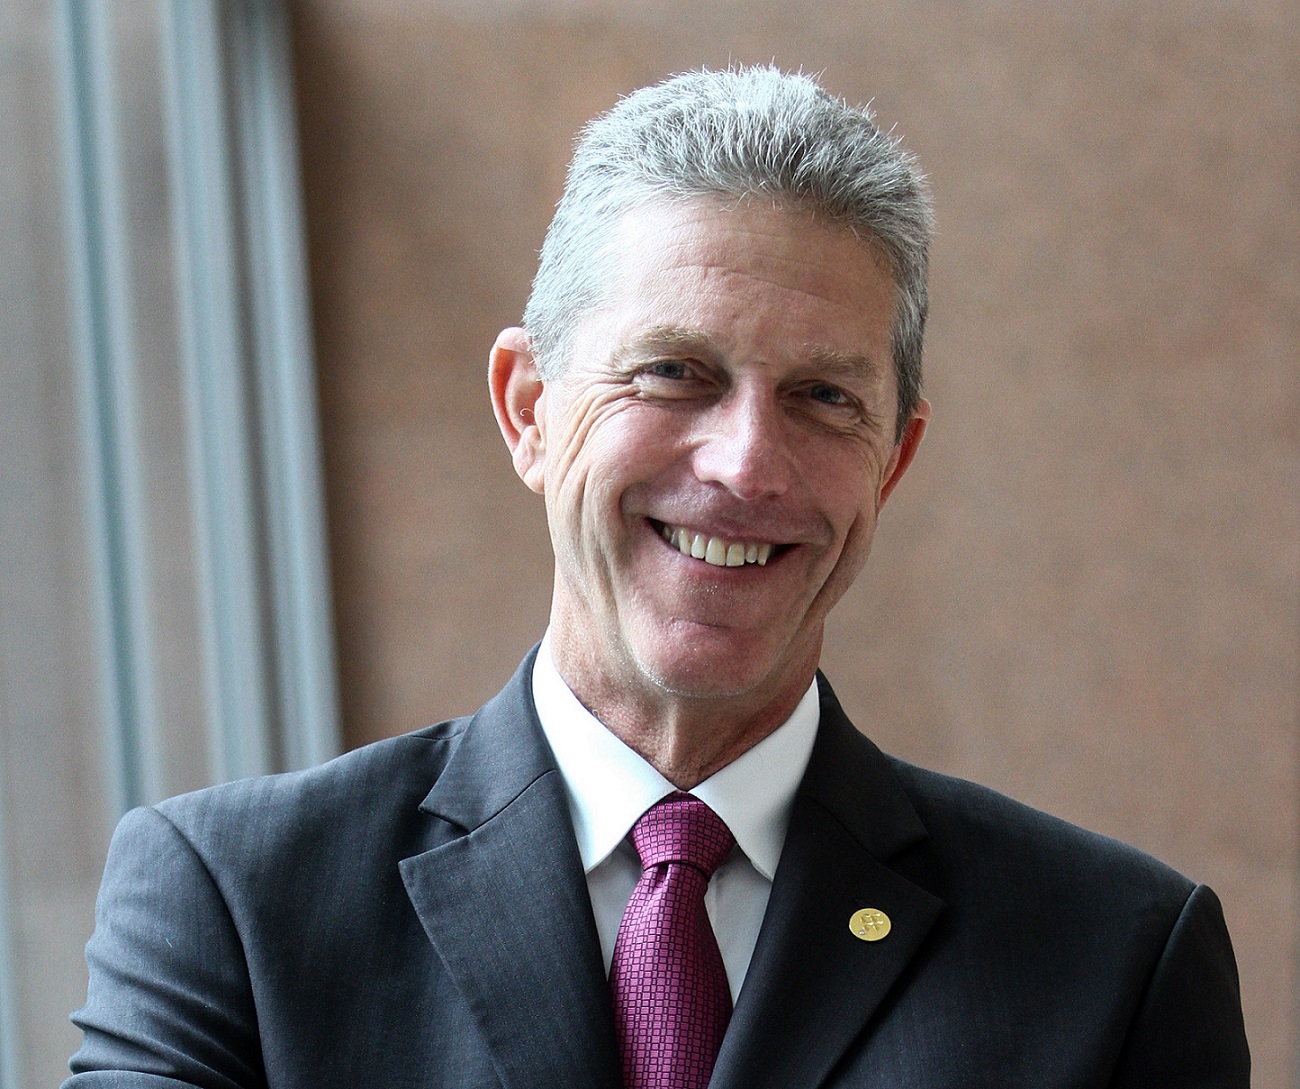 Alan Pryor, General Manager of the Kuala Lumpur Convention Centre. Image credit: Business Today